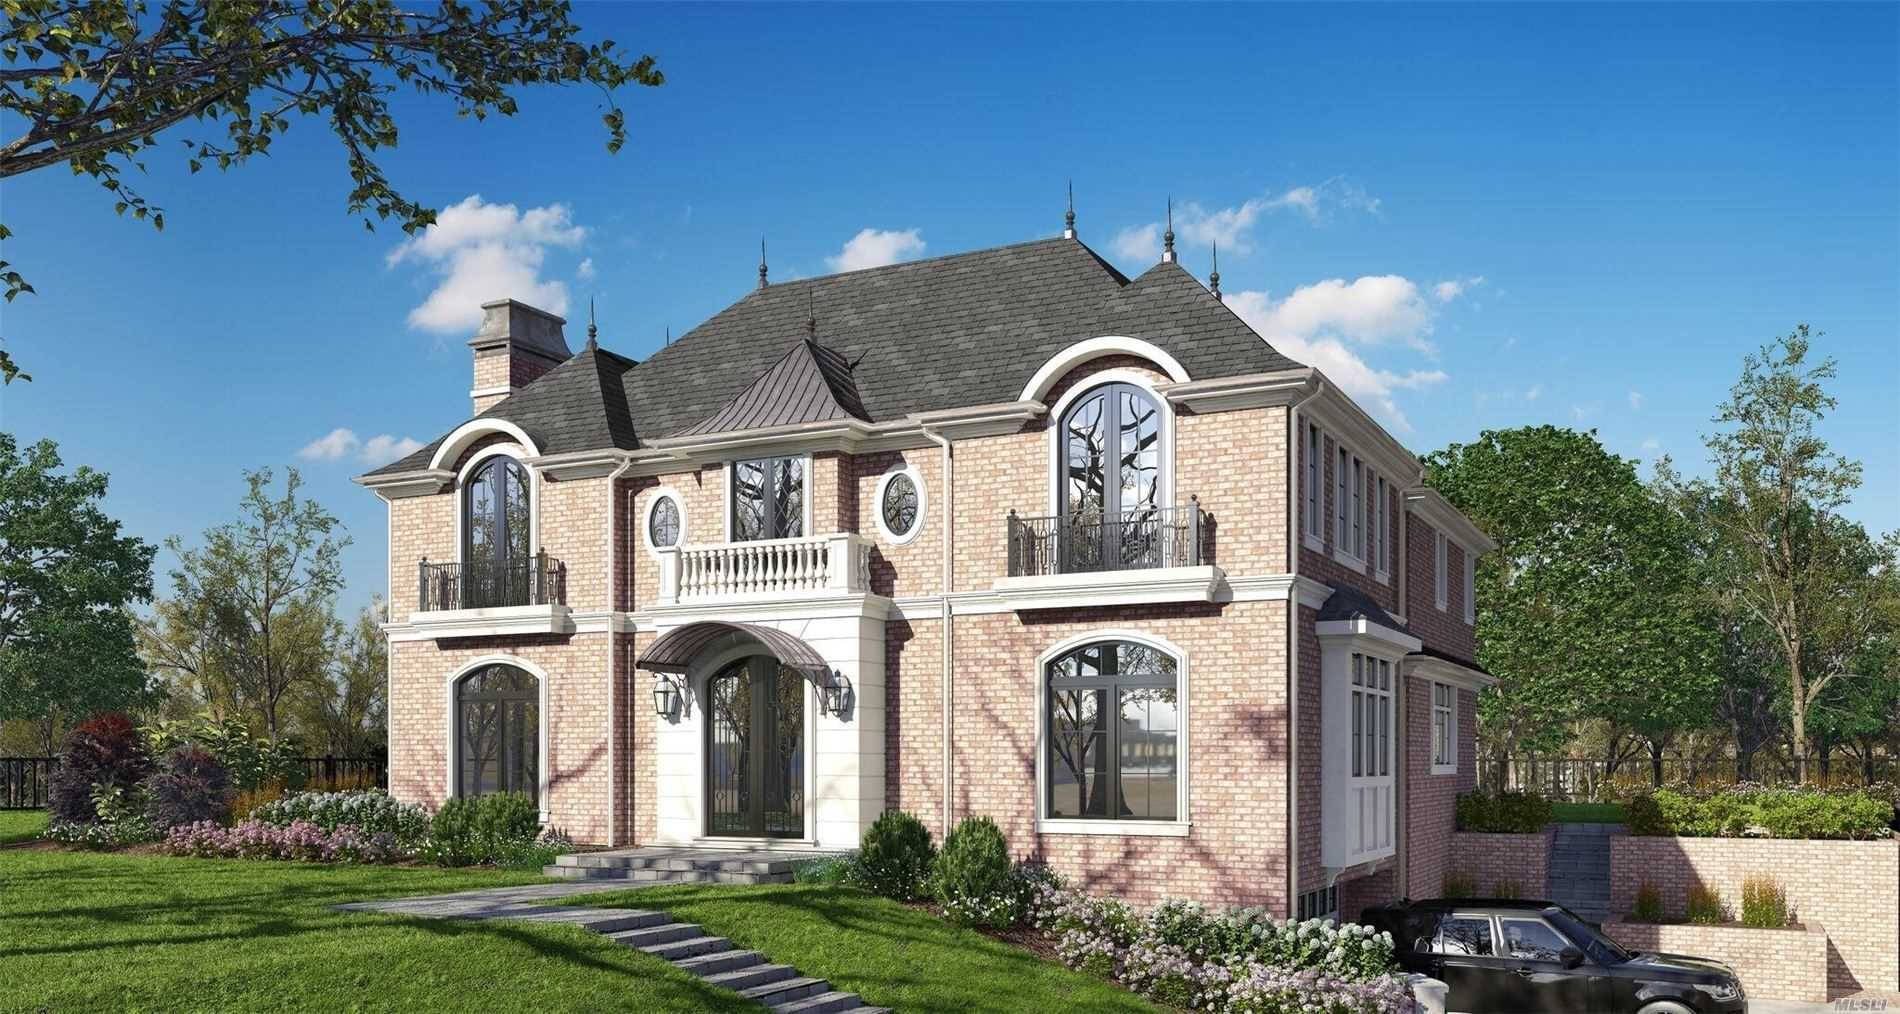 Great Neck Estates Ultra Luxury New Construction, All Brick Center Hall Colonial On Prime Street With Oversized Property.